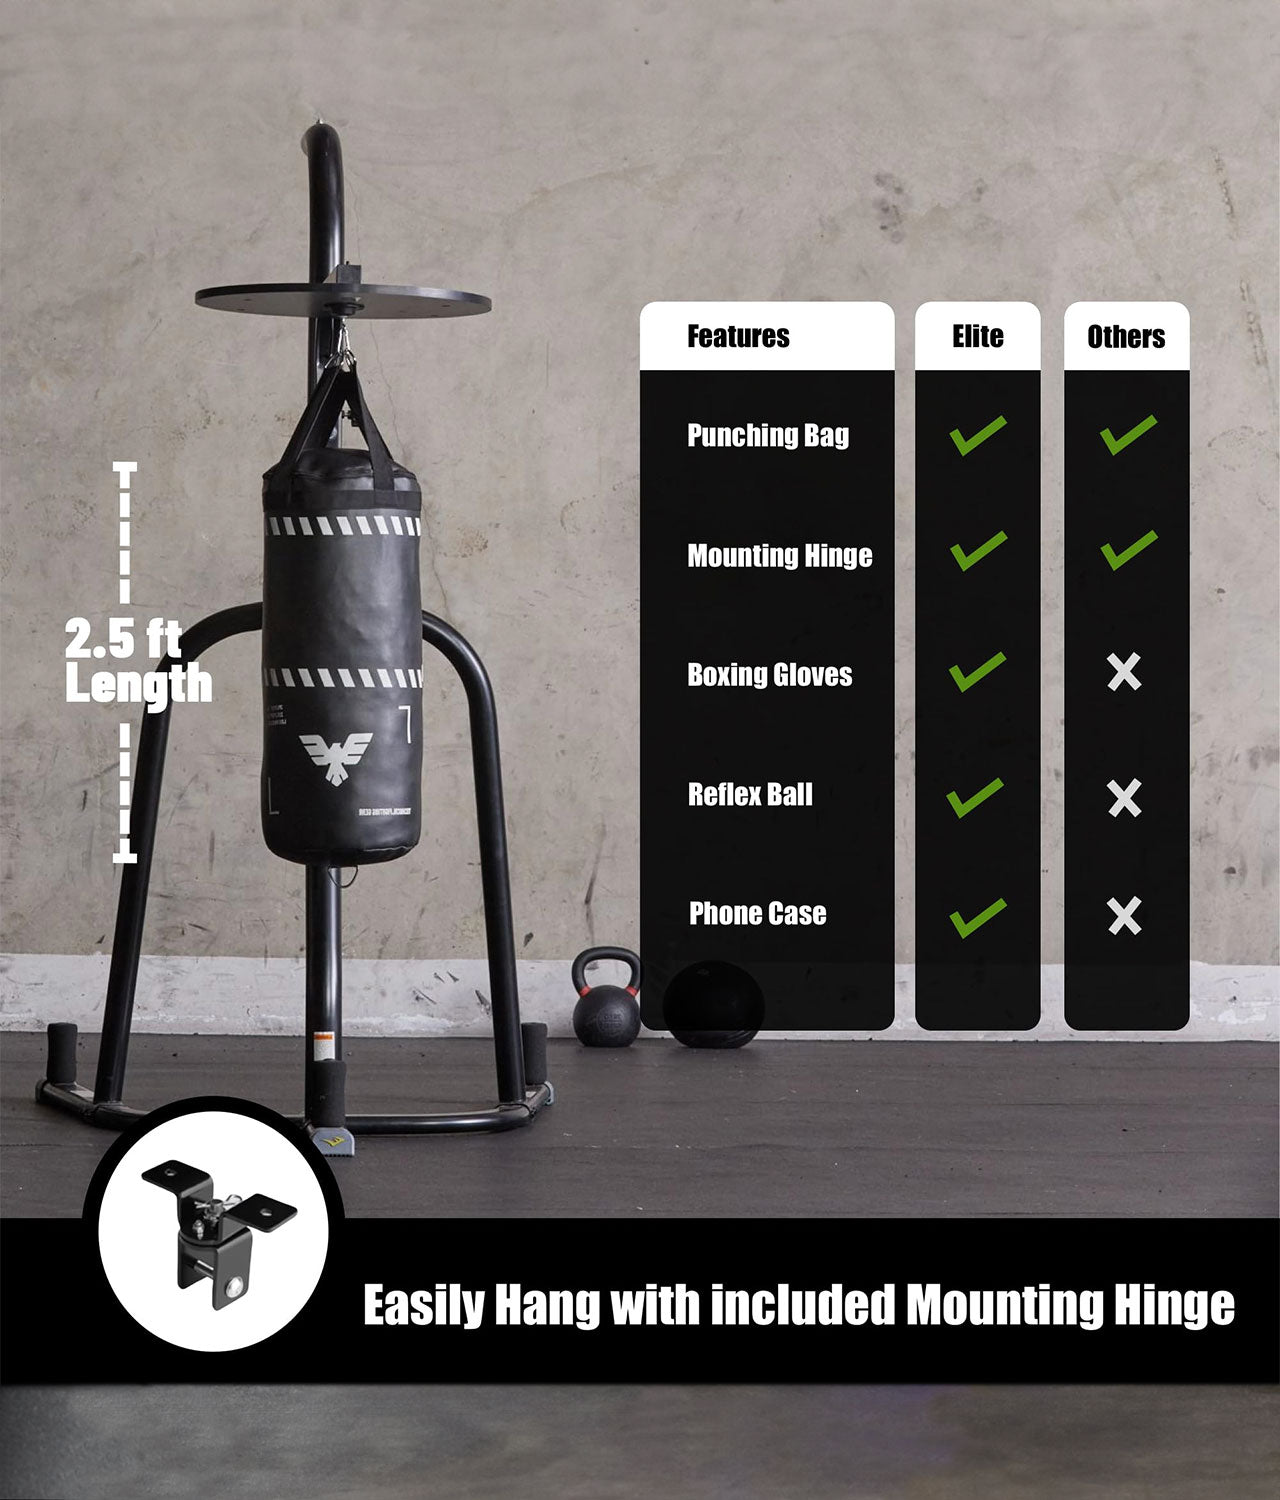 Elite Sports Kids 2.5 ft Essential Boxing Punching Bag Set Features